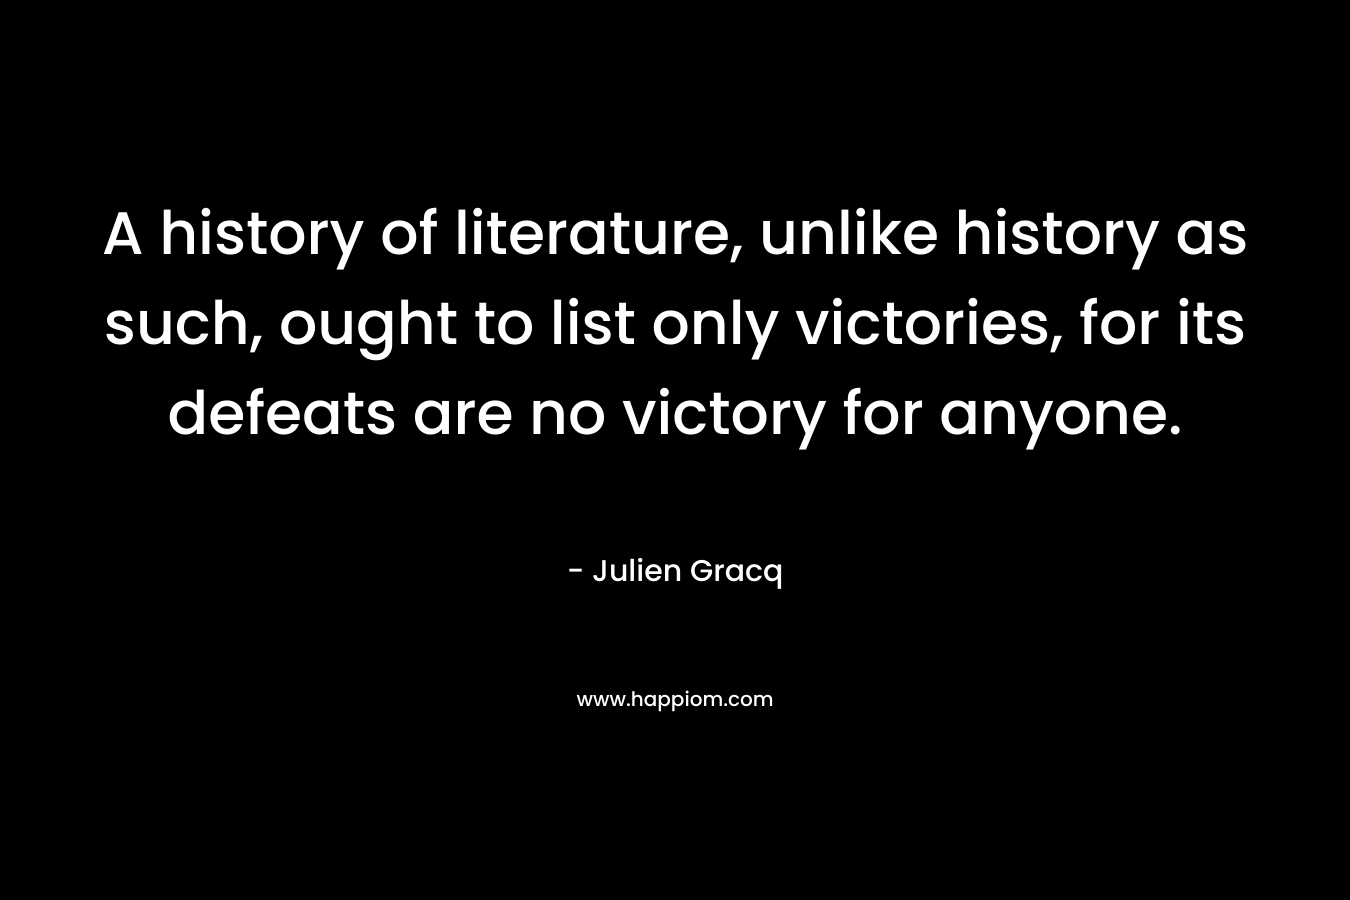 A history of literature, unlike history as such, ought to list only victories, for its defeats are no victory for anyone.